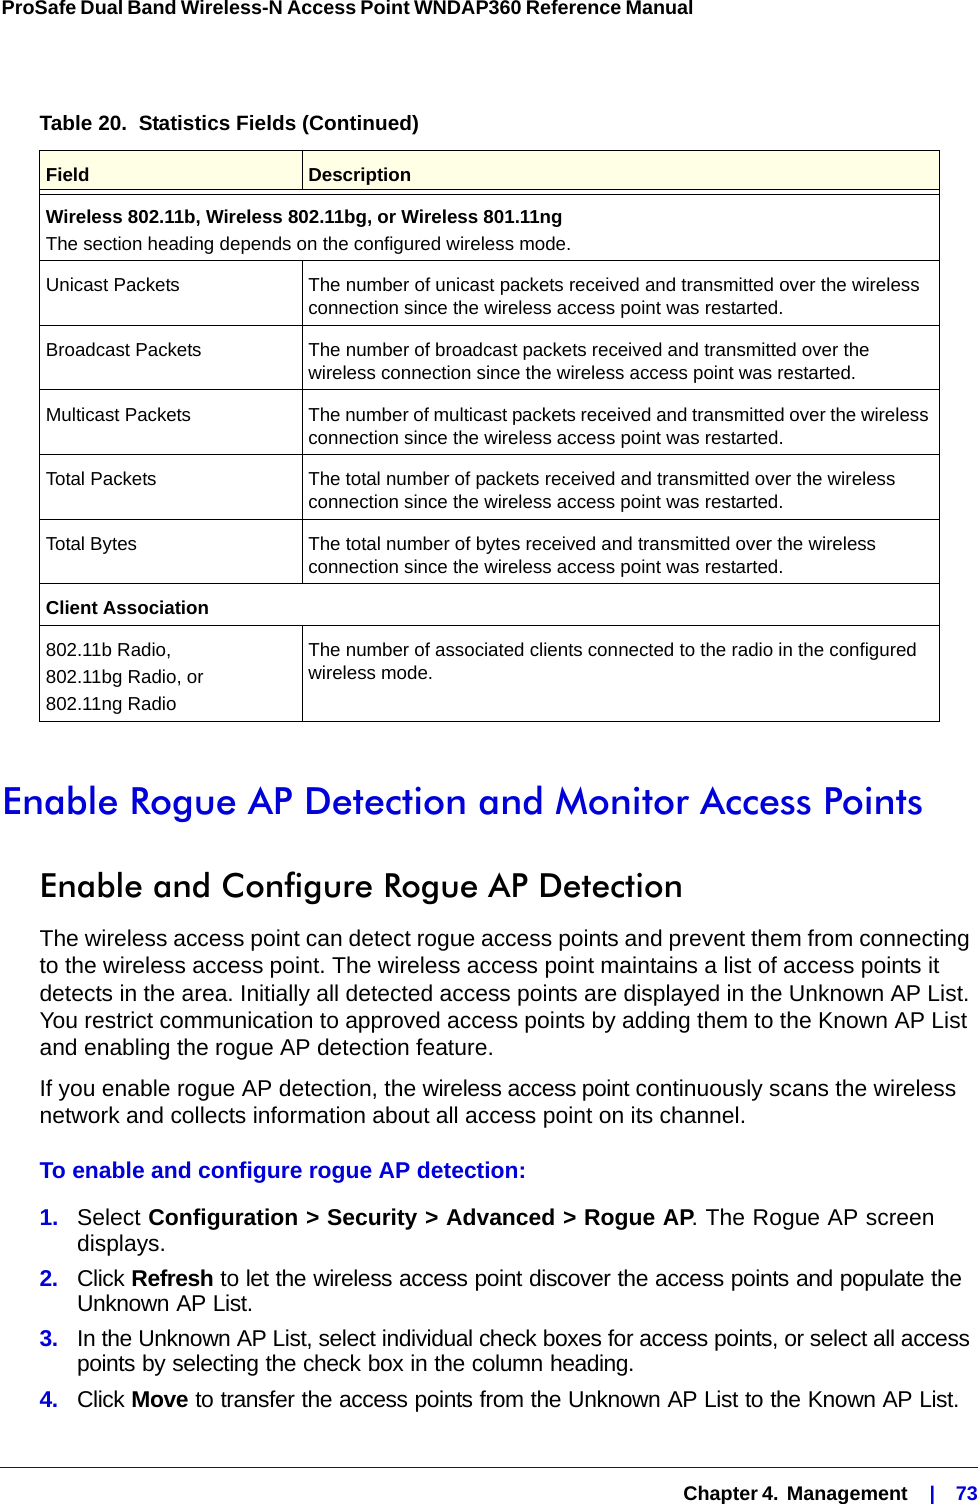   Chapter 4.  Management    |    73ProSafe Dual Band Wireless-N Access Point WNDAP360 Reference Manual Enable Rogue AP Detection and Monitor Access PointsEnable and Configure Rogue AP DetectionThe wireless access point can detect rogue access points and prevent them from connecting to the wireless access point. The wireless access point maintains a list of access points it detects in the area. Initially all detected access points are displayed in the Unknown AP List. You restrict communication to approved access points by adding them to the Known AP List and enabling the rogue AP detection feature.If you enable rogue AP detection, the wireless access point continuously scans the wireless network and collects information about all access point on its channel.To enable and configure rogue AP detection:1.  Select Configuration &gt; Security &gt; Advanced &gt; Rogue AP. The Rogue AP screen displays.2.  Click Refresh to let the wireless access point discover the access points and populate the Unknown AP List.3.  In the Unknown AP List, select individual check boxes for access points, or select all access points by selecting the check box in the column heading.4.  Click Move to transfer the access points from the Unknown AP List to the Known AP List.Wireless 802.11b, Wireless 802.11bg, or Wireless 801.11ngThe section heading depends on the configured wireless mode.Unicast Packets The number of unicast packets received and transmitted over the wireless connection since the wireless access point was restarted.Broadcast Packets The number of broadcast packets received and transmitted over the wireless connection since the wireless access point was restarted.Multicast Packets The number of multicast packets received and transmitted over the wireless connection since the wireless access point was restarted.Total Packets The total number of packets received and transmitted over the wireless connection since the wireless access point was restarted.Total Bytes The total number of bytes received and transmitted over the wireless connection since the wireless access point was restarted.Client Association802.11b Radio,802.11bg Radio, or802.11ng RadioThe number of associated clients connected to the radio in the configured wireless mode.Table 20.  Statistics Fields (Continued)Field  Description